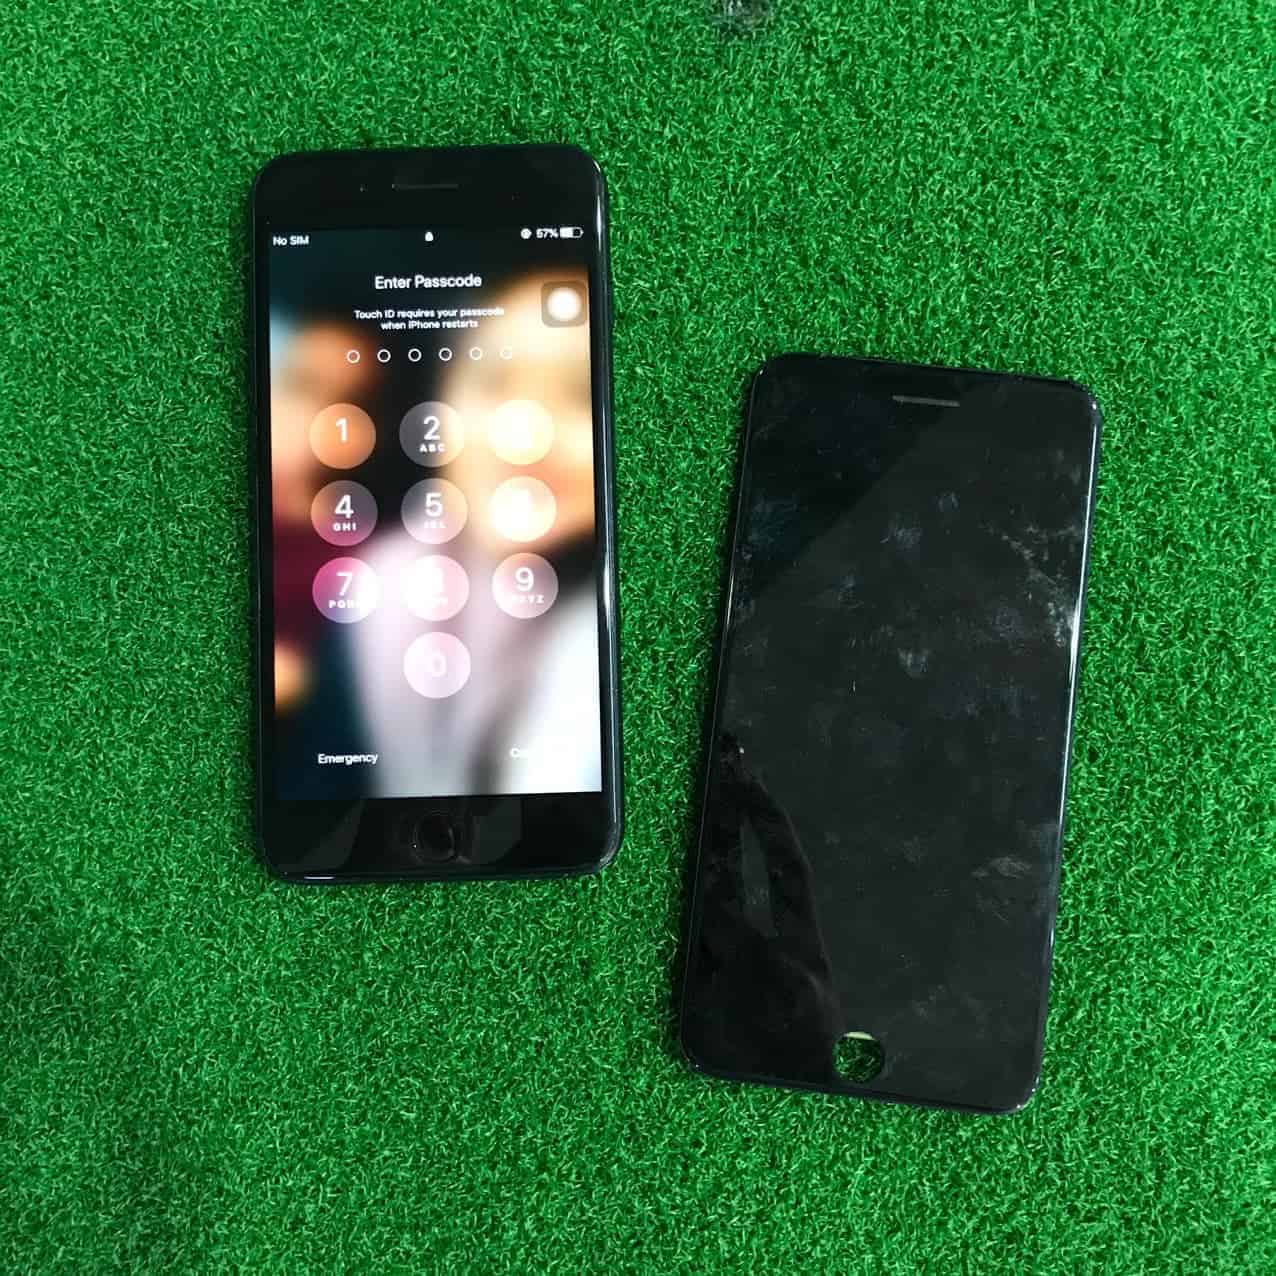 MrFix Bangi: iPhone 7 plus screen replacement, cheap and affordable